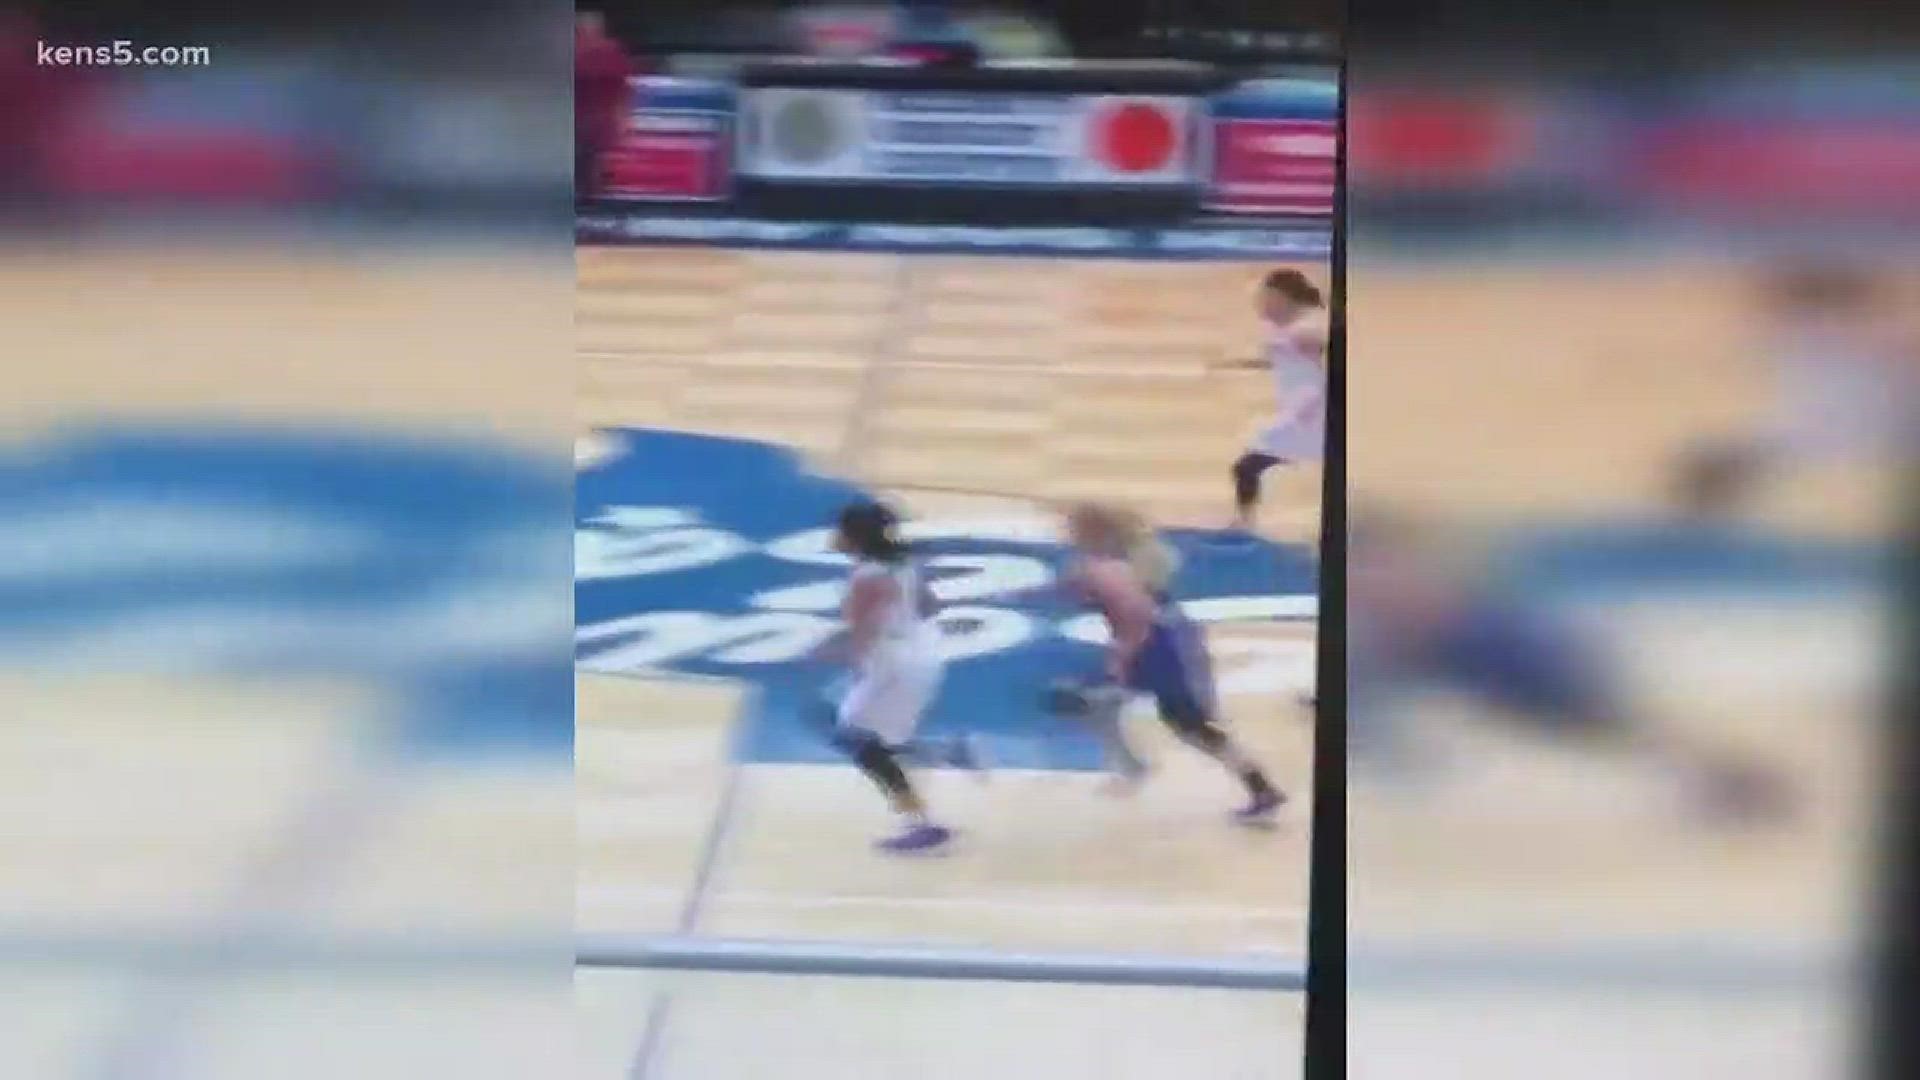 The University Interscholastic League is punishing a Tivy High School basketball player after she shoved a South San player to the floor during a game.